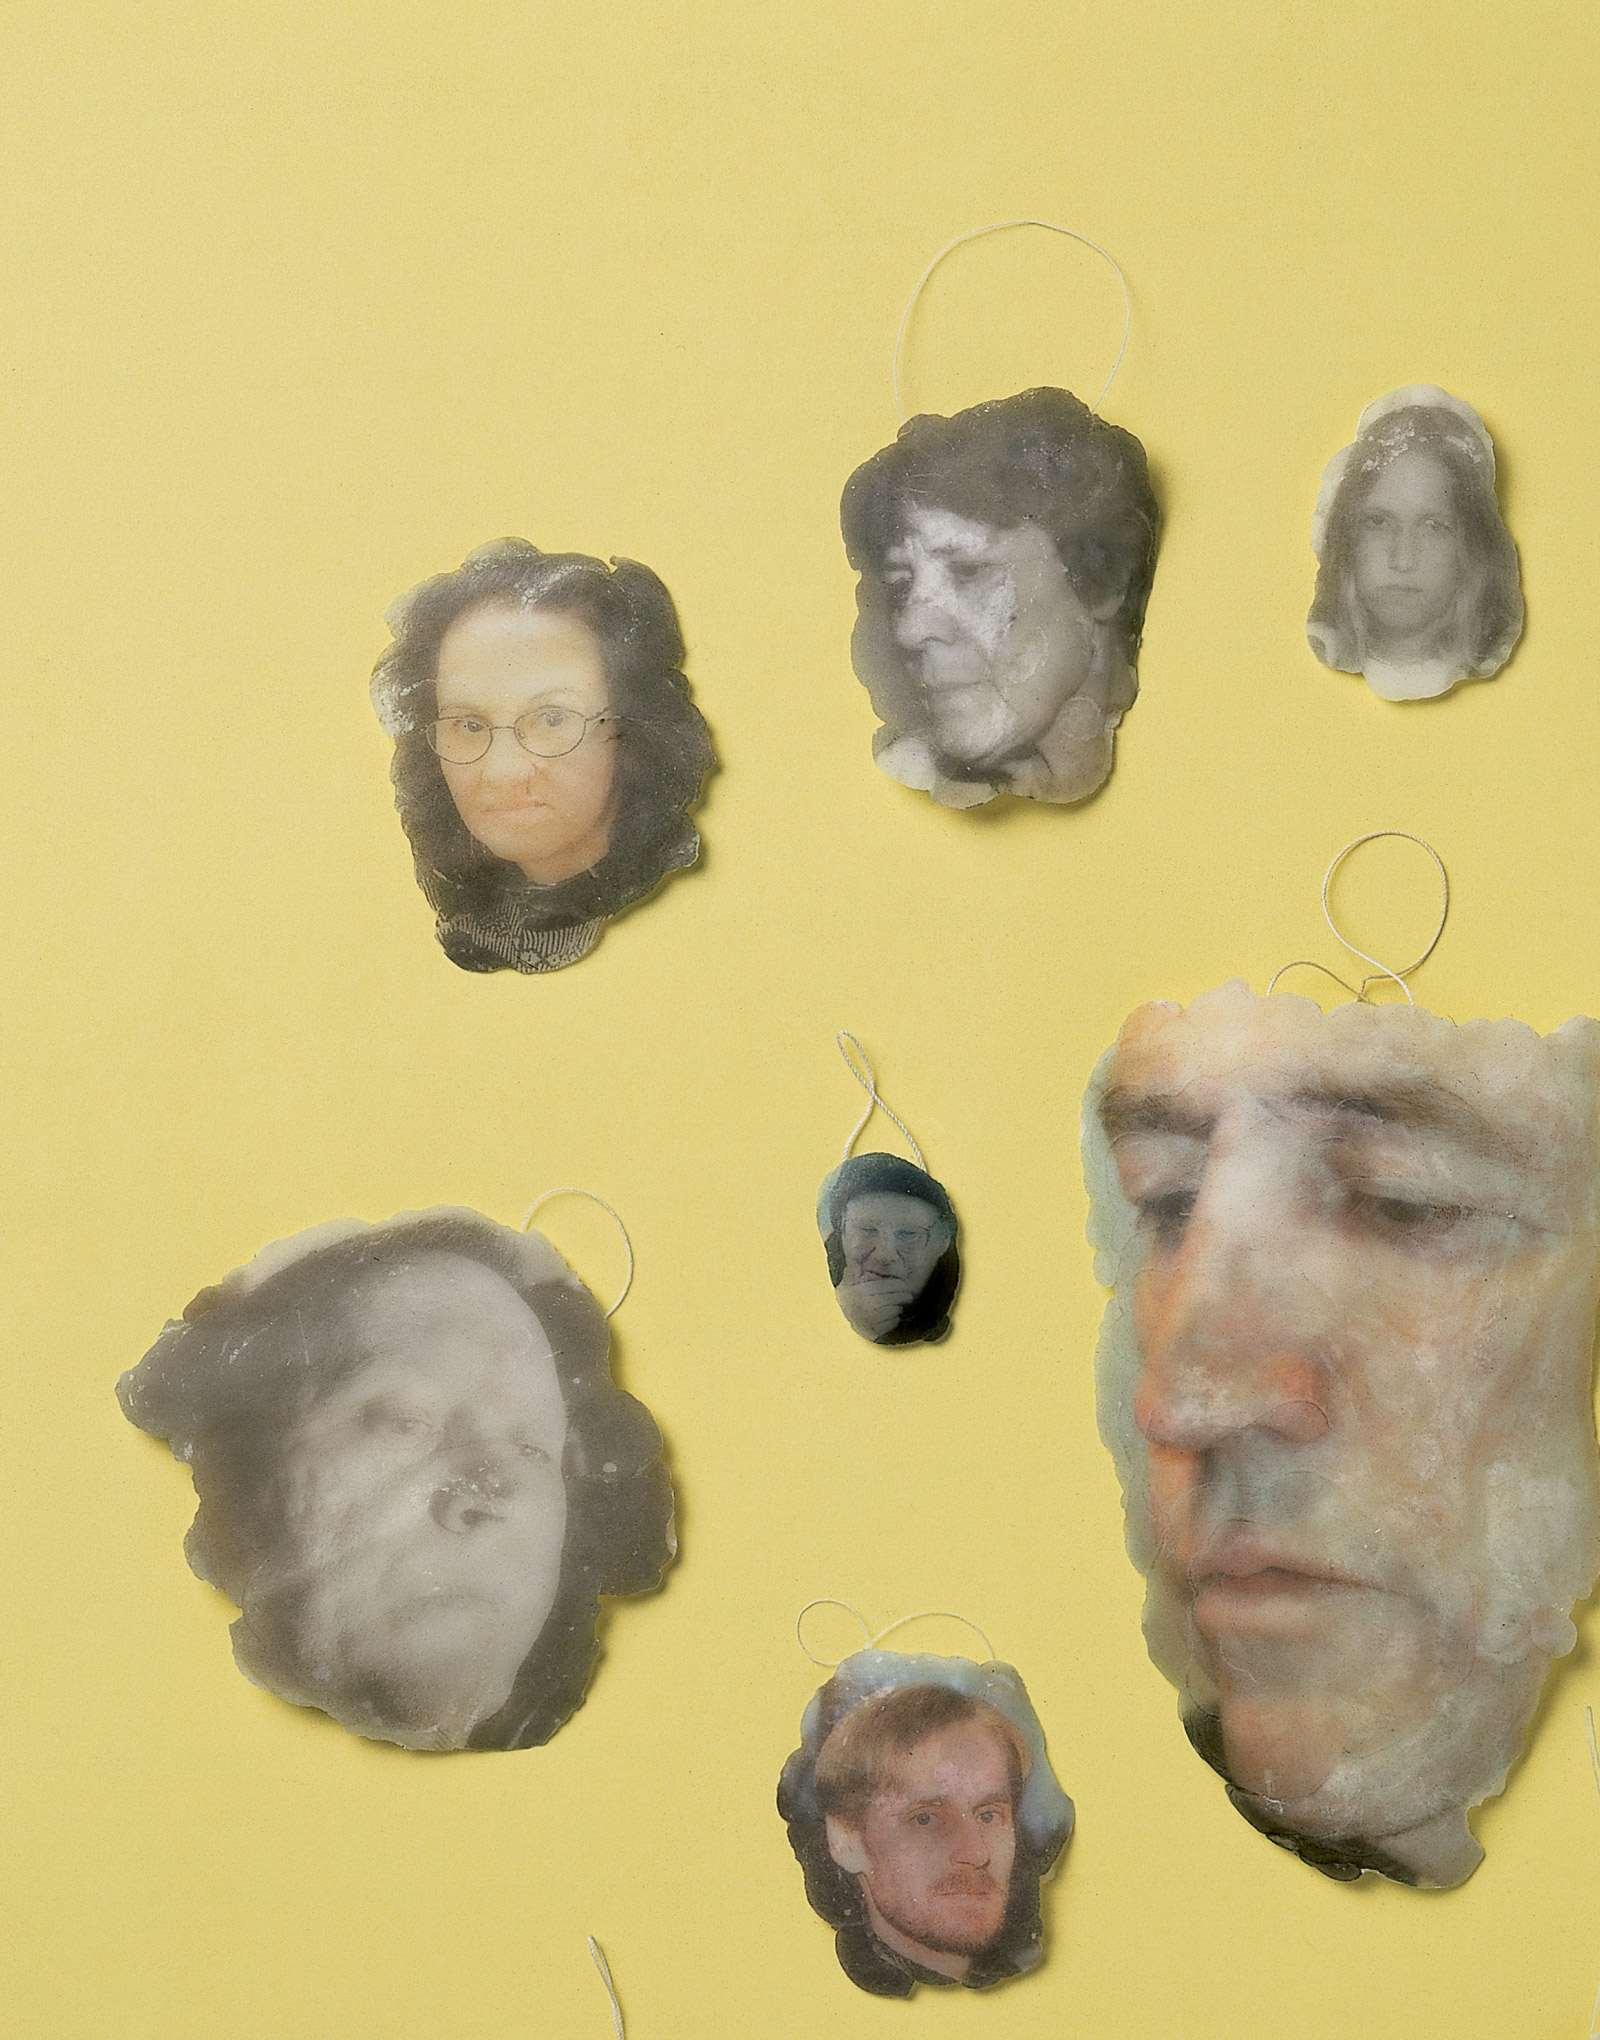 A photograph of fourteen wax medallions, each bearing a photographic image of a face. The medallions were produced by dropping hot wax on photographs of faces in newspapers, thus transferring each image onto the wax. The medallions are part of The Disappointed and the Offended, an artist project by Magnus Bärtås included in this issue’s theme section on Failure.
